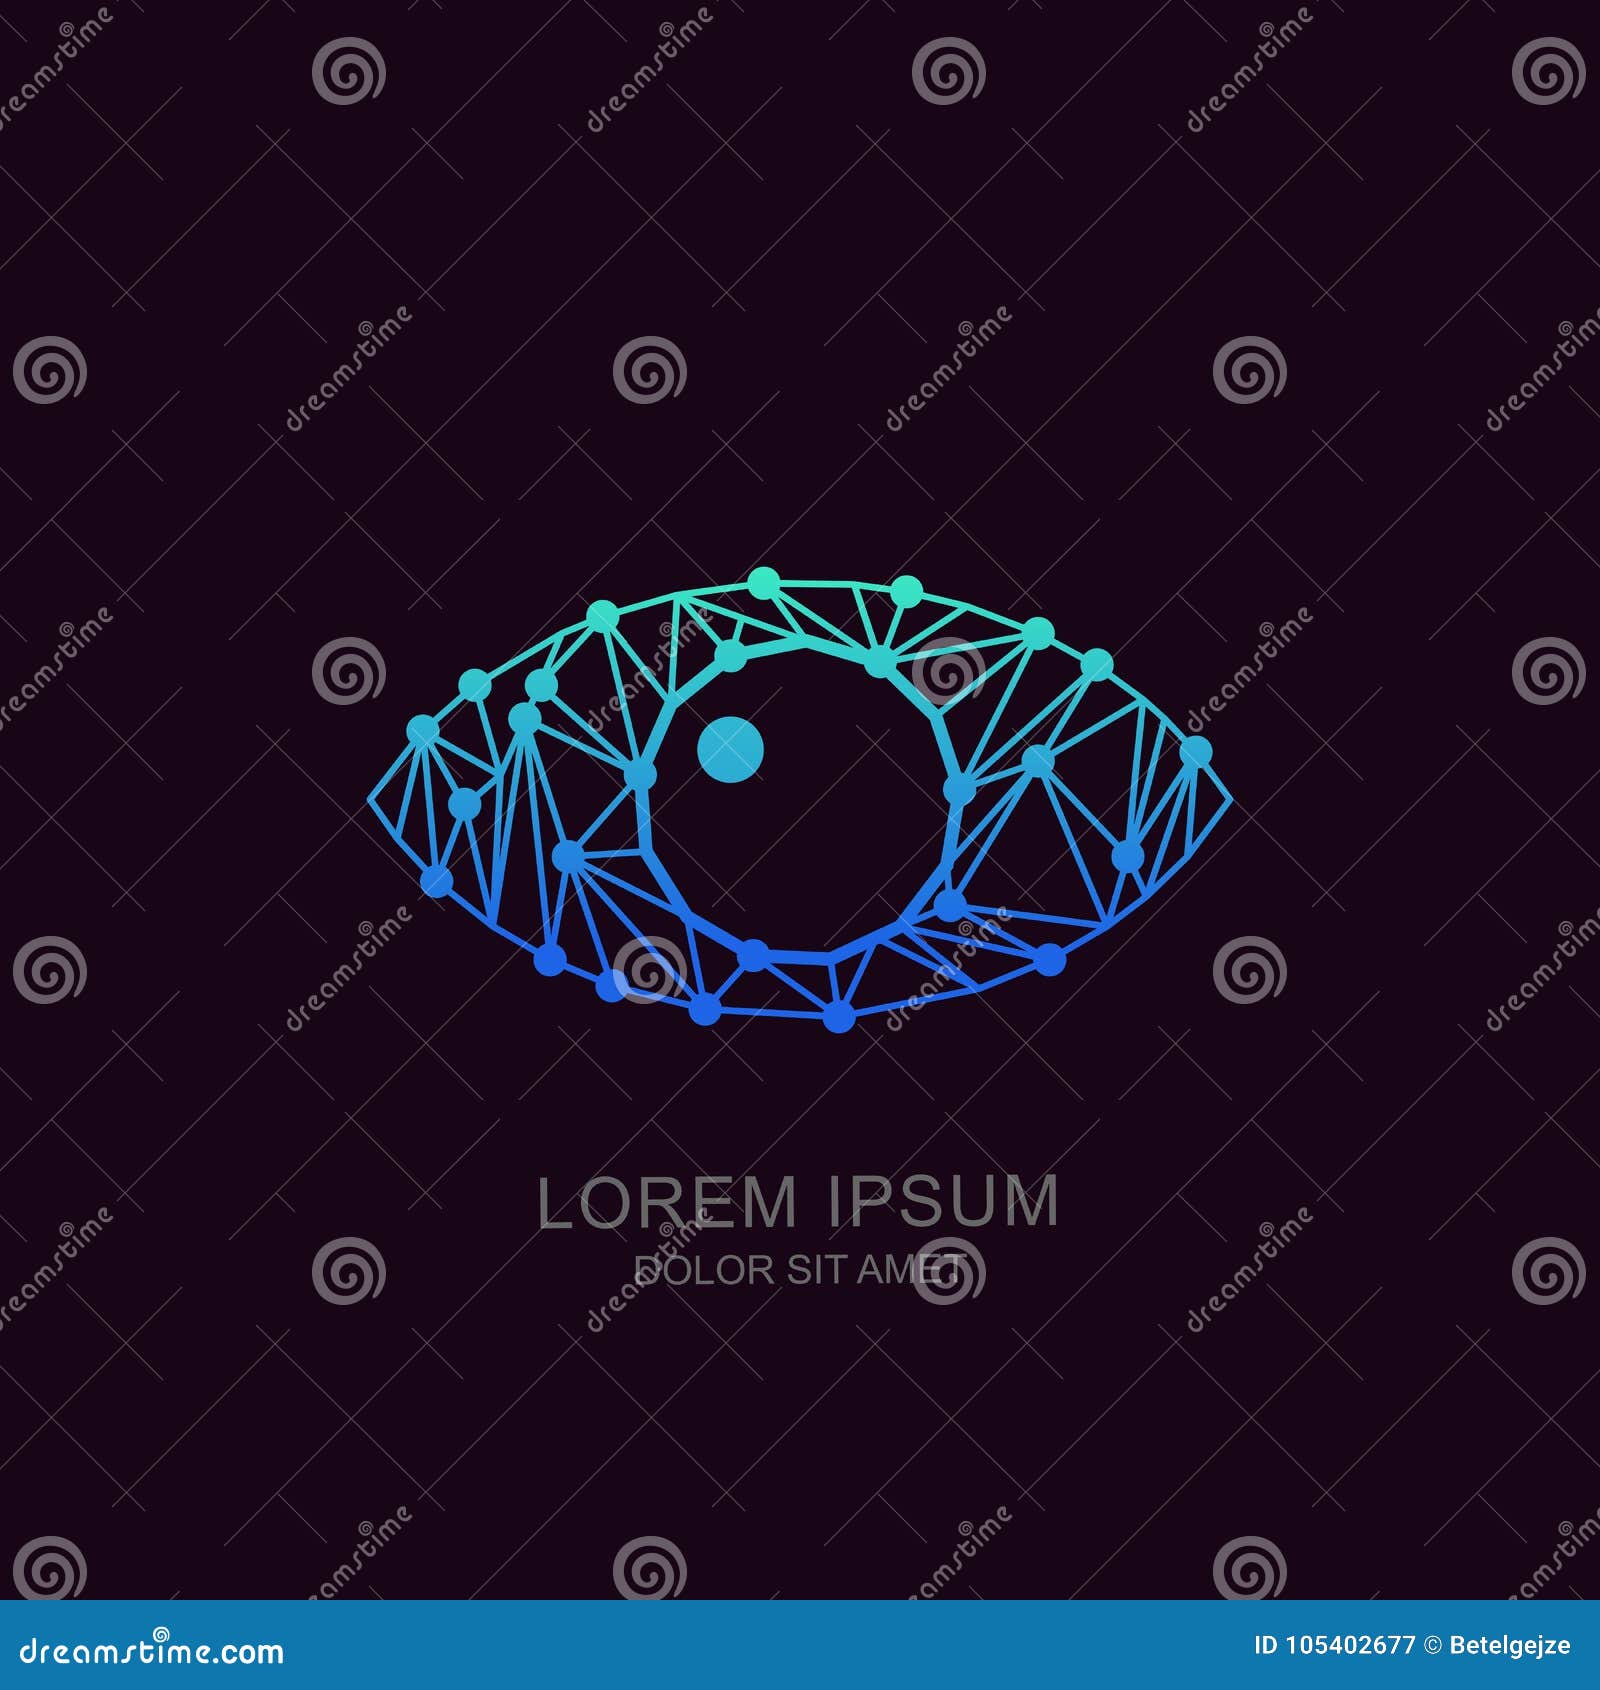 eye tech logo, sign or emblem . concept for biometric recognition, cctv, retina scan, cyber vision.